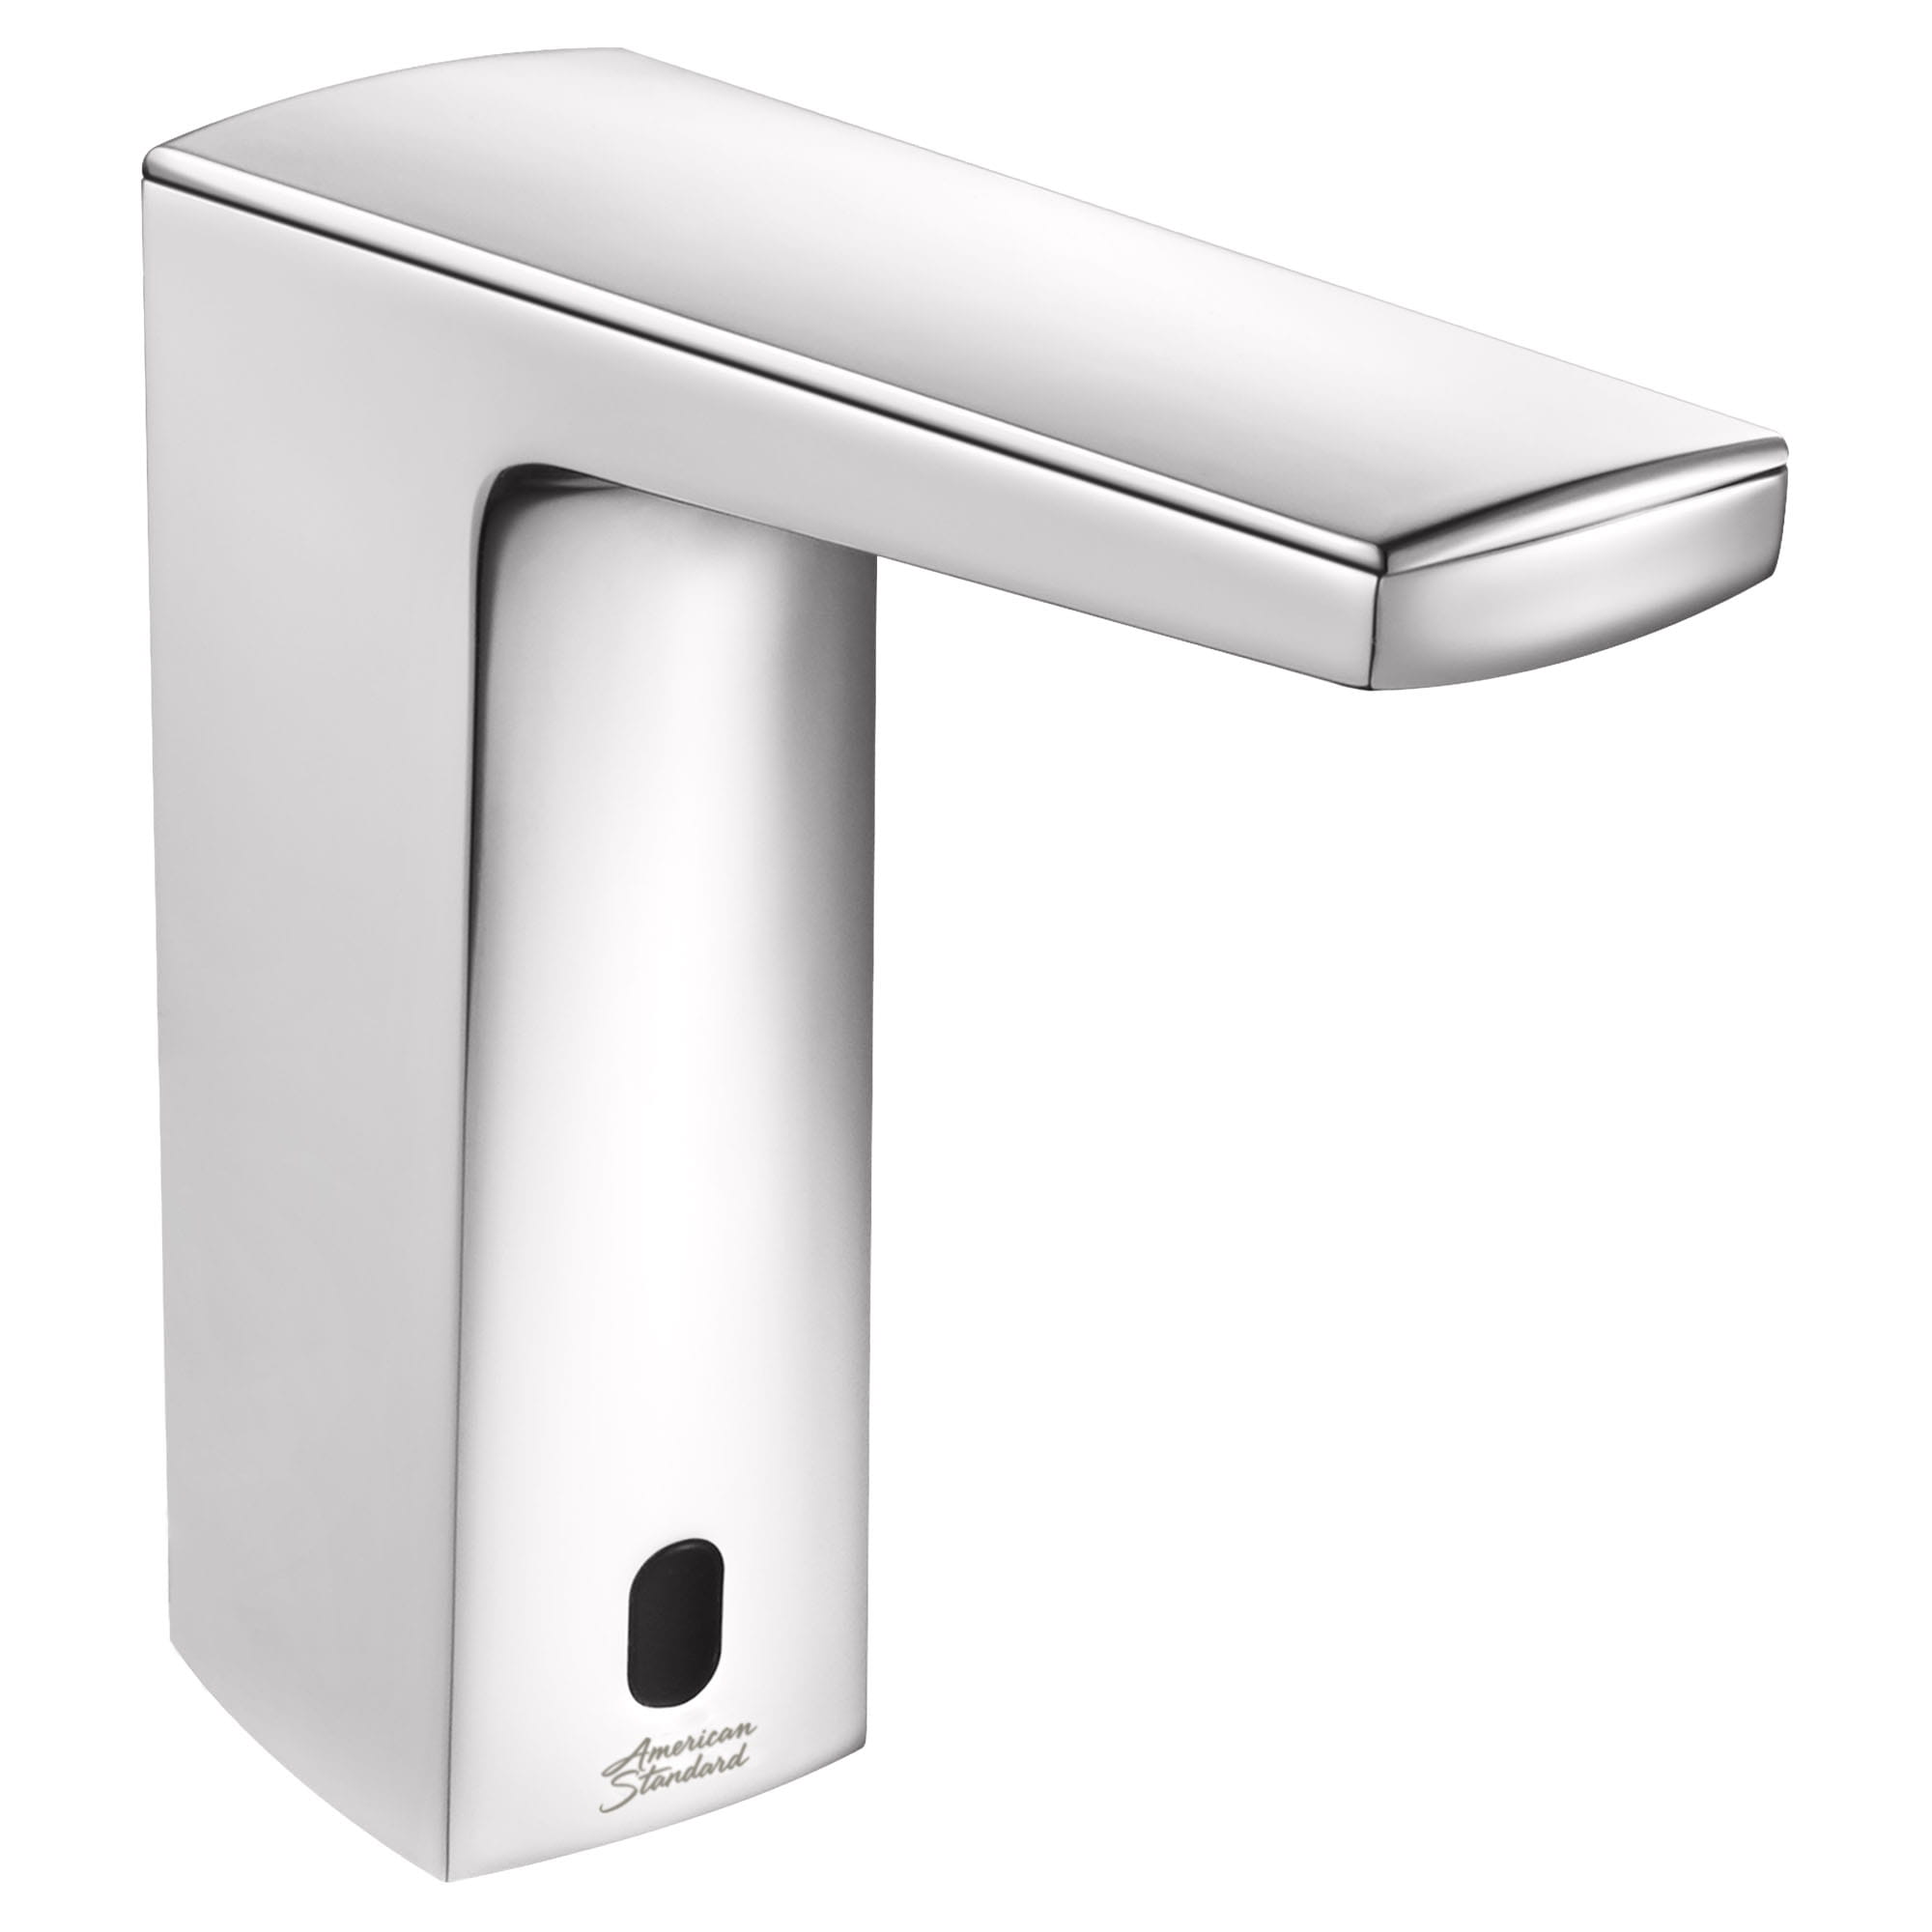 Paradigm® Selectronic® Touchless Faucet, Base Model With Above-Deck Mixing, 0.5 gpm/1.9 Lpm